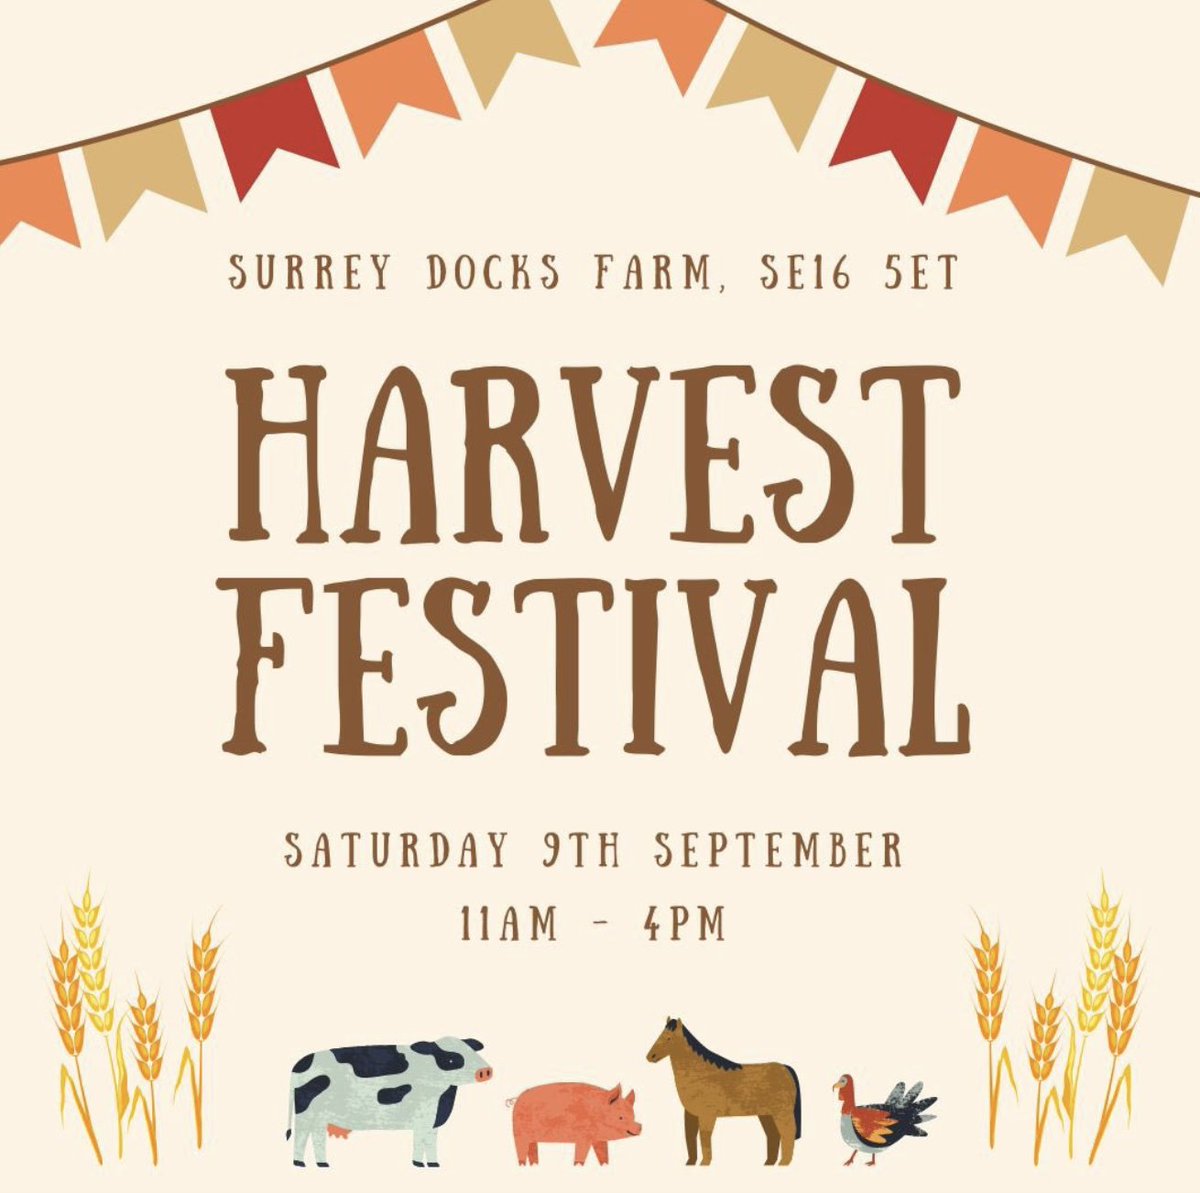 Get ready for @surreydocksfarm's annual Harvest Festival this weekend! 🌾 There will be fair games, a BBQ, animal handling, Morris men, face painting, craft stalls, farm produce, and more 🐔🍕🎨 ⏲️11 am - 4 pm 📍Rotherhithe St, South Wharf, SE16 5ET 🎟️FREE